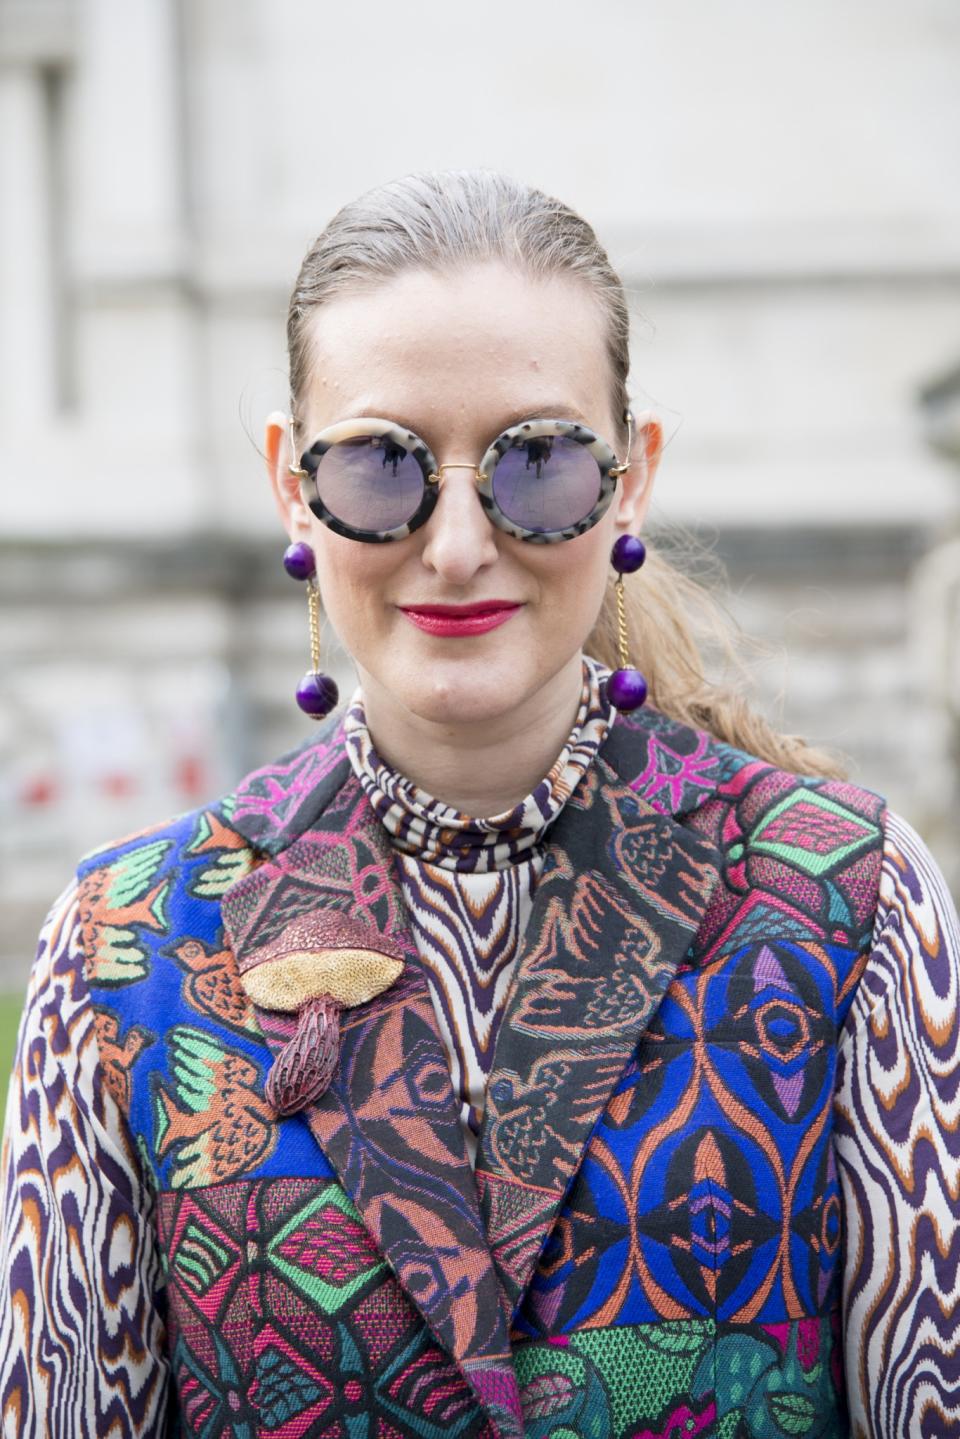 <p>Fashion editor at The Globe Style, Odessa Parker, wears a Philip Sparks coat, Dries Van Noten shirt and Miu Miu sunglasses [Photo: Kirstin Sinclair/Getty Images] </p>